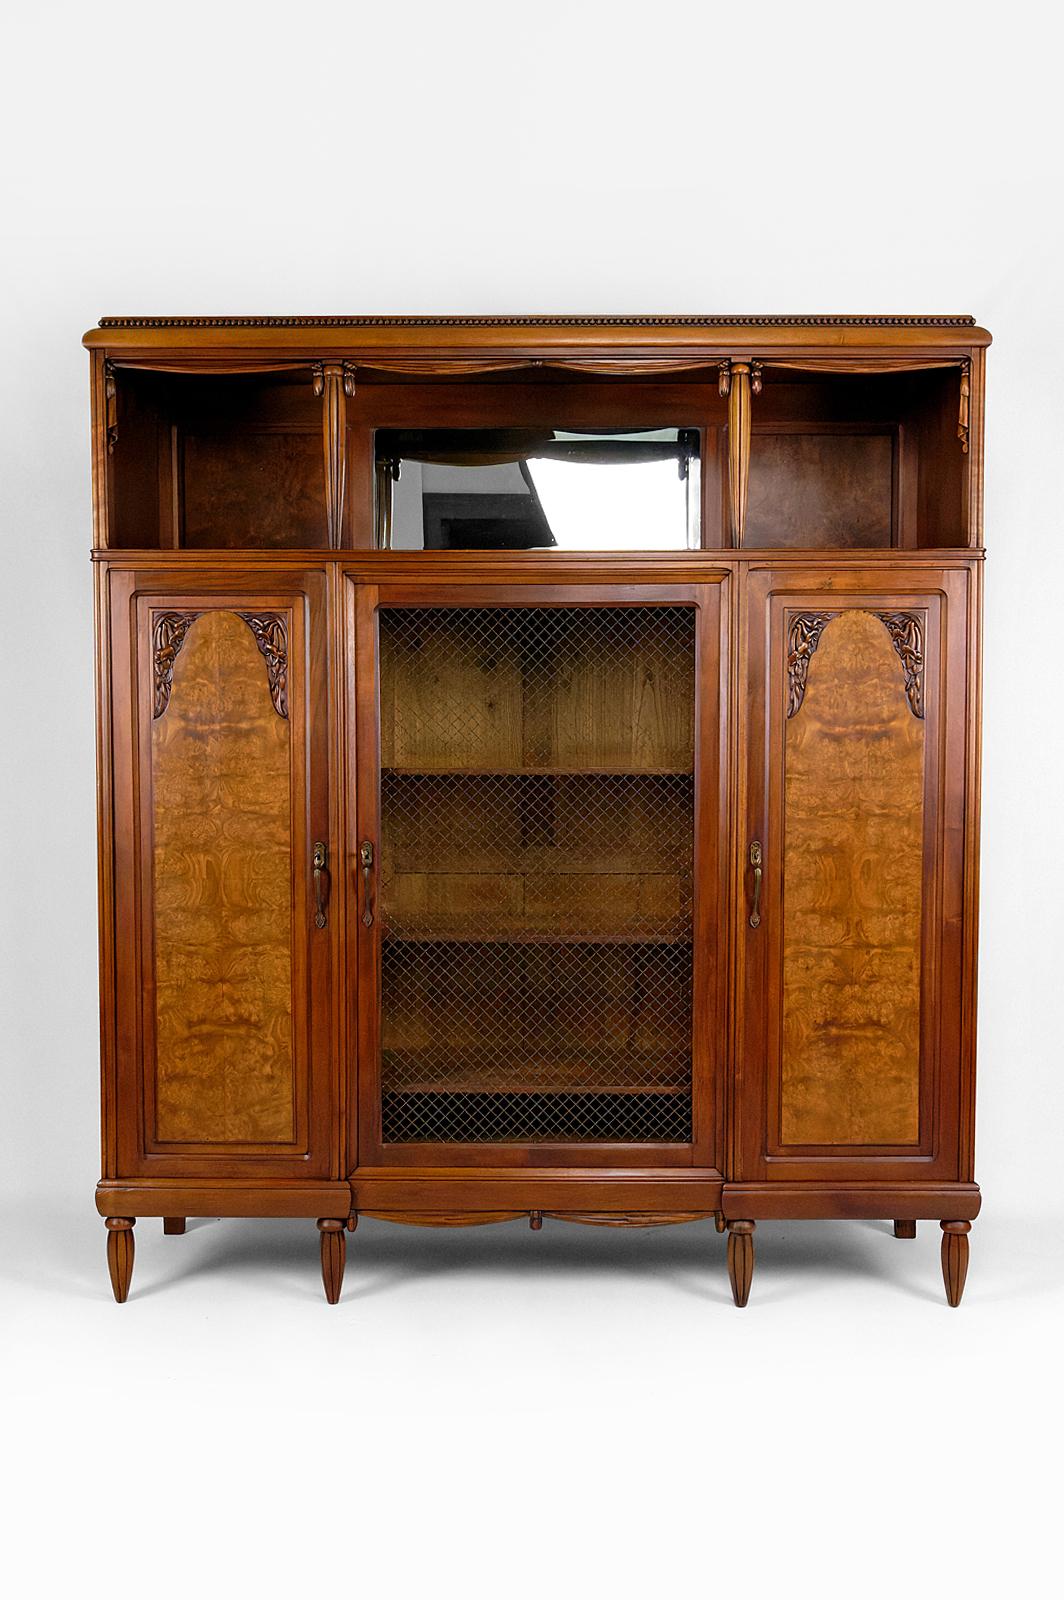 Art Deco, France, circa 1920-1925
In the style of the productions of Paul Follot, Maurice Dufrène.

In walnut and burl.
Beautiful fluted feet.
Pretty wood carvings: row of beads, drapes, flowers carved on the doors.

Consisting of a niche in the